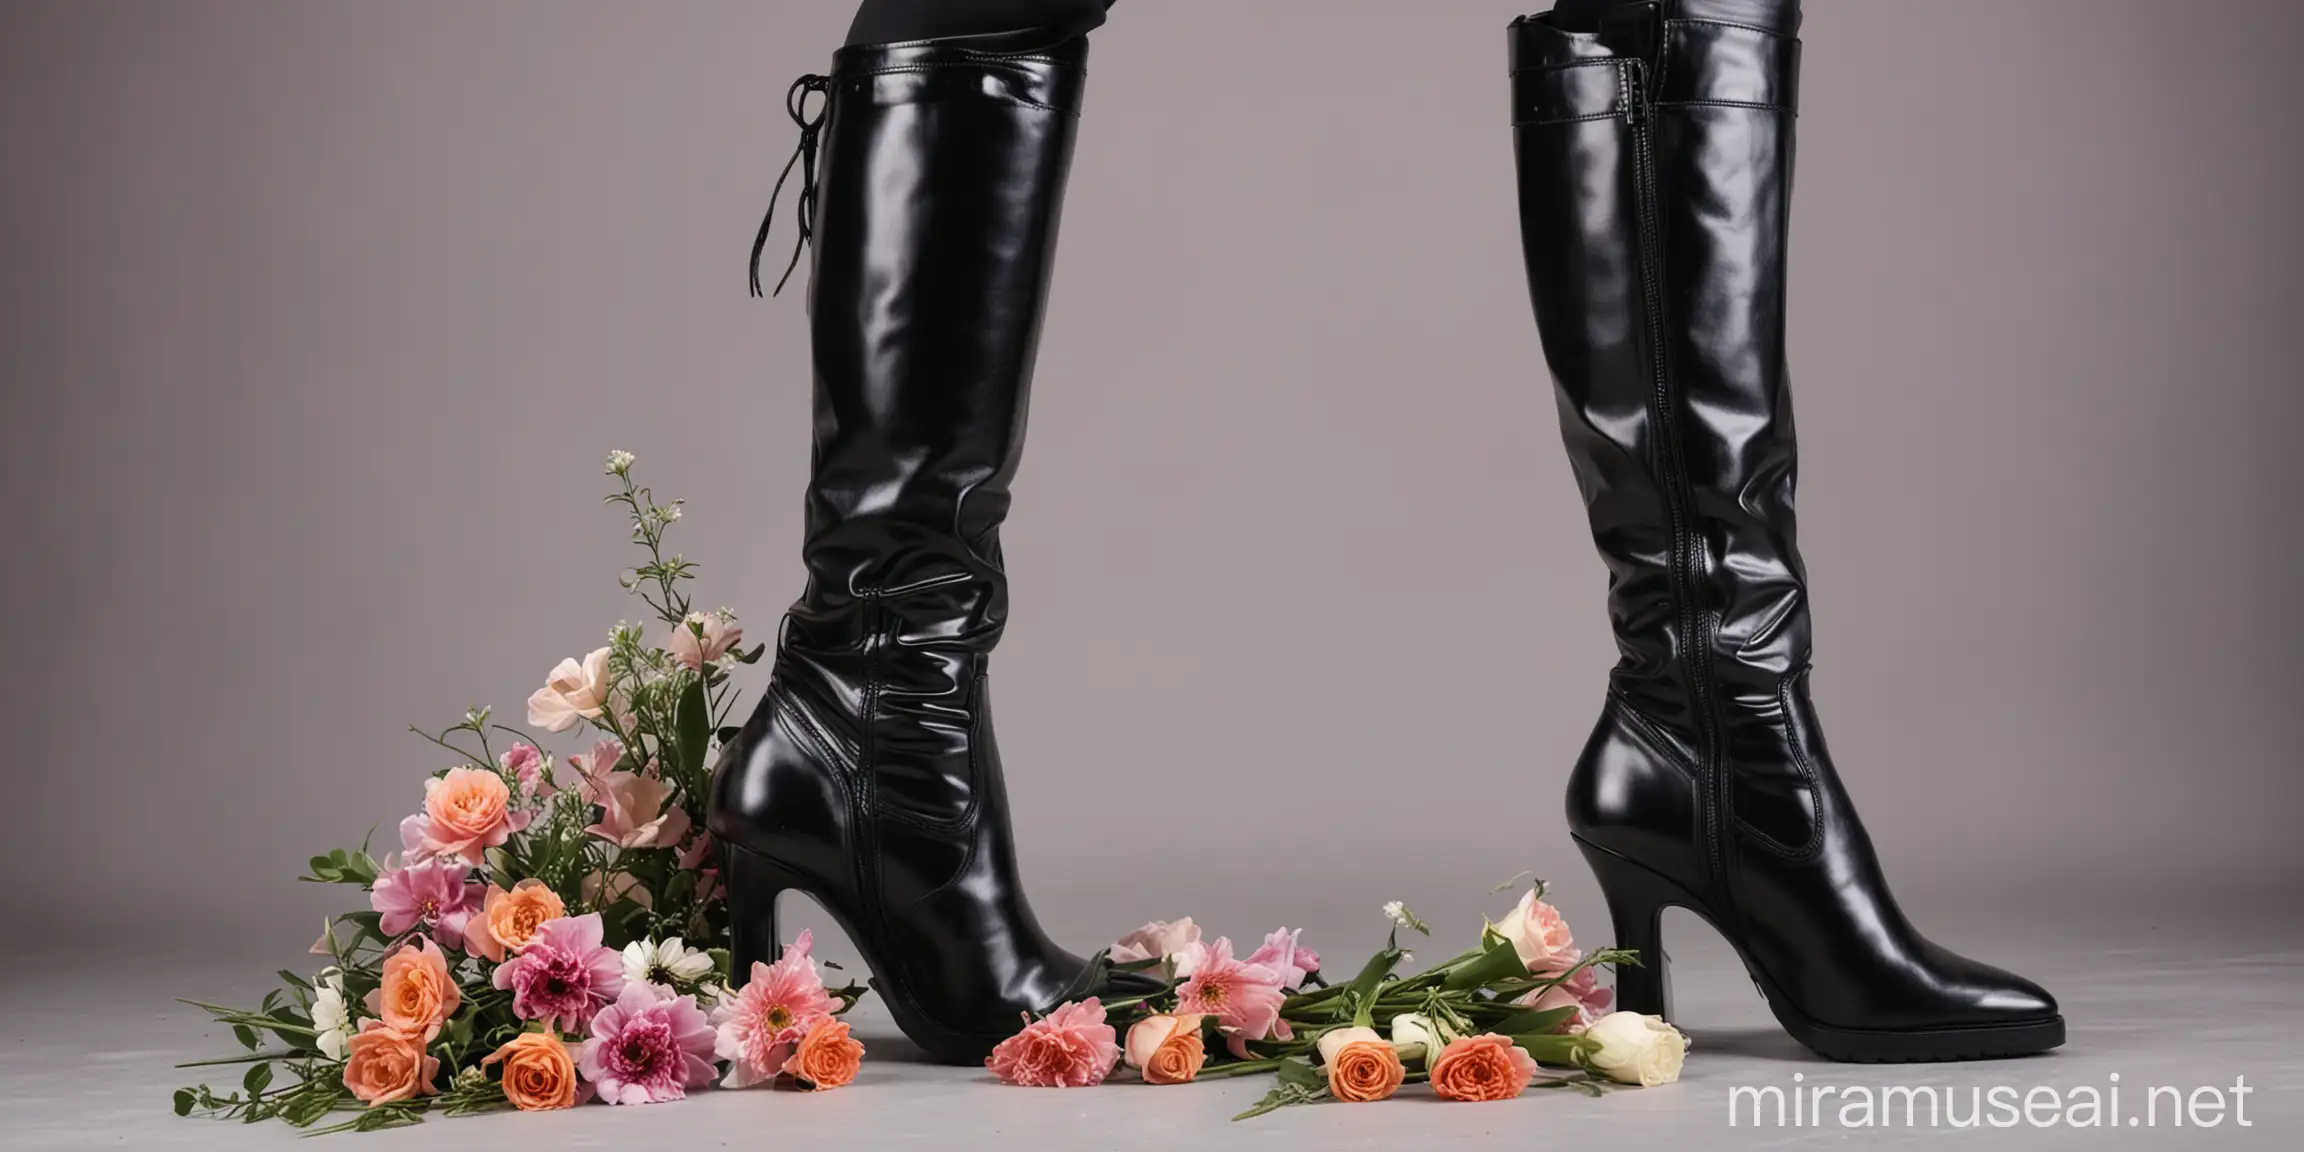 Thigh high black leather boot stepping on a bouquet of flowers,black vinyl high heel boot steps on flowers,crushing flowers,stiletto heels, squeezing flowers